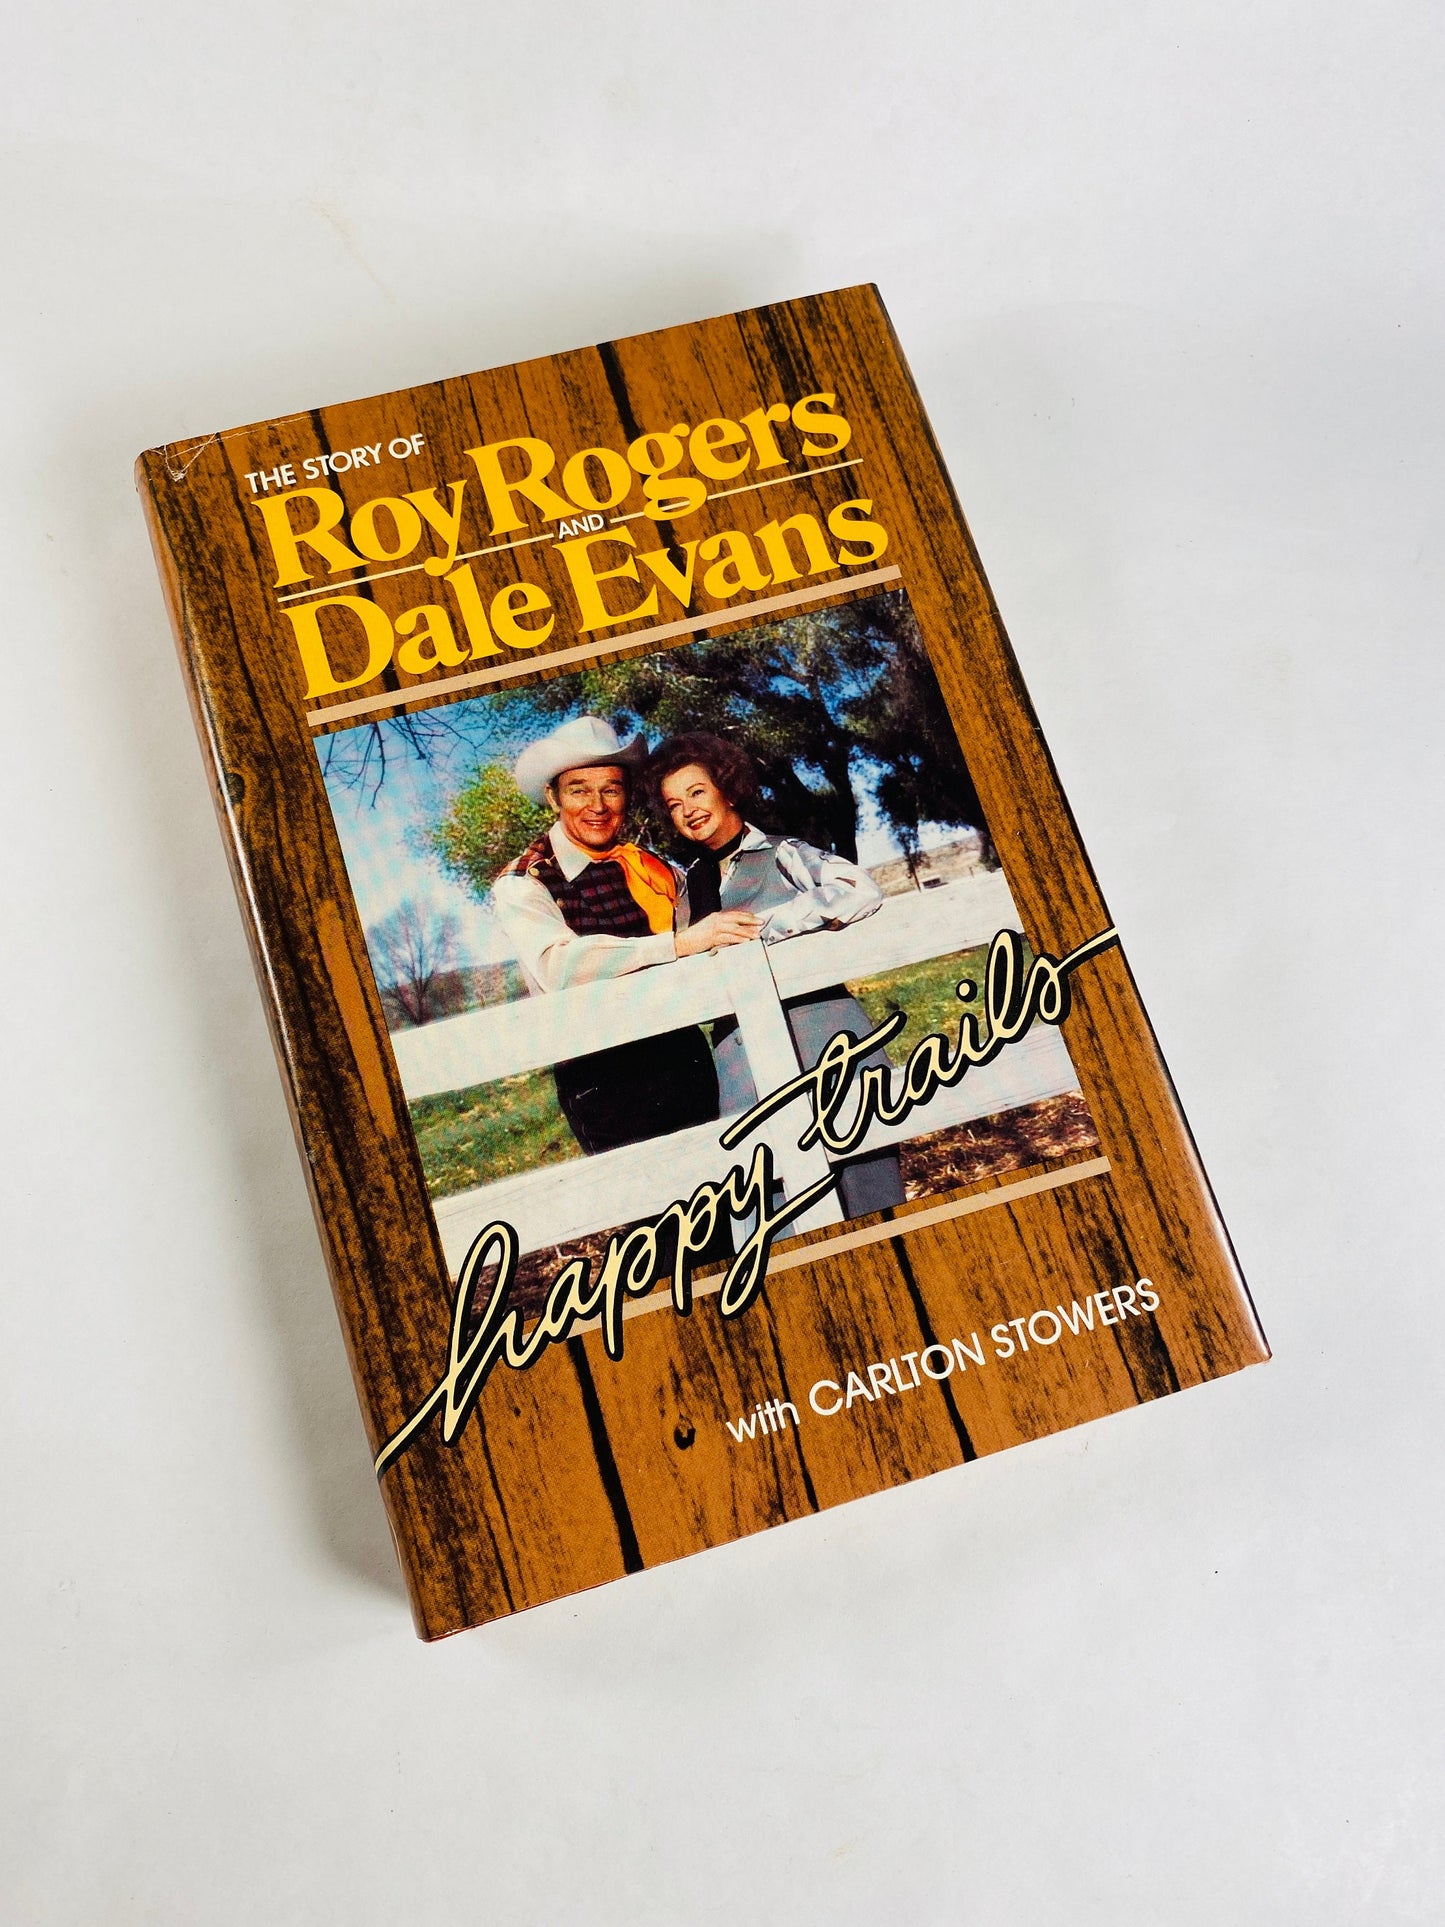 Roy Rogers & Dale Evans Rogers vintage FIRST EDITION book Happy Trails circa 1979 by Carlton Stowers. King of the Cowboys Queen of the West